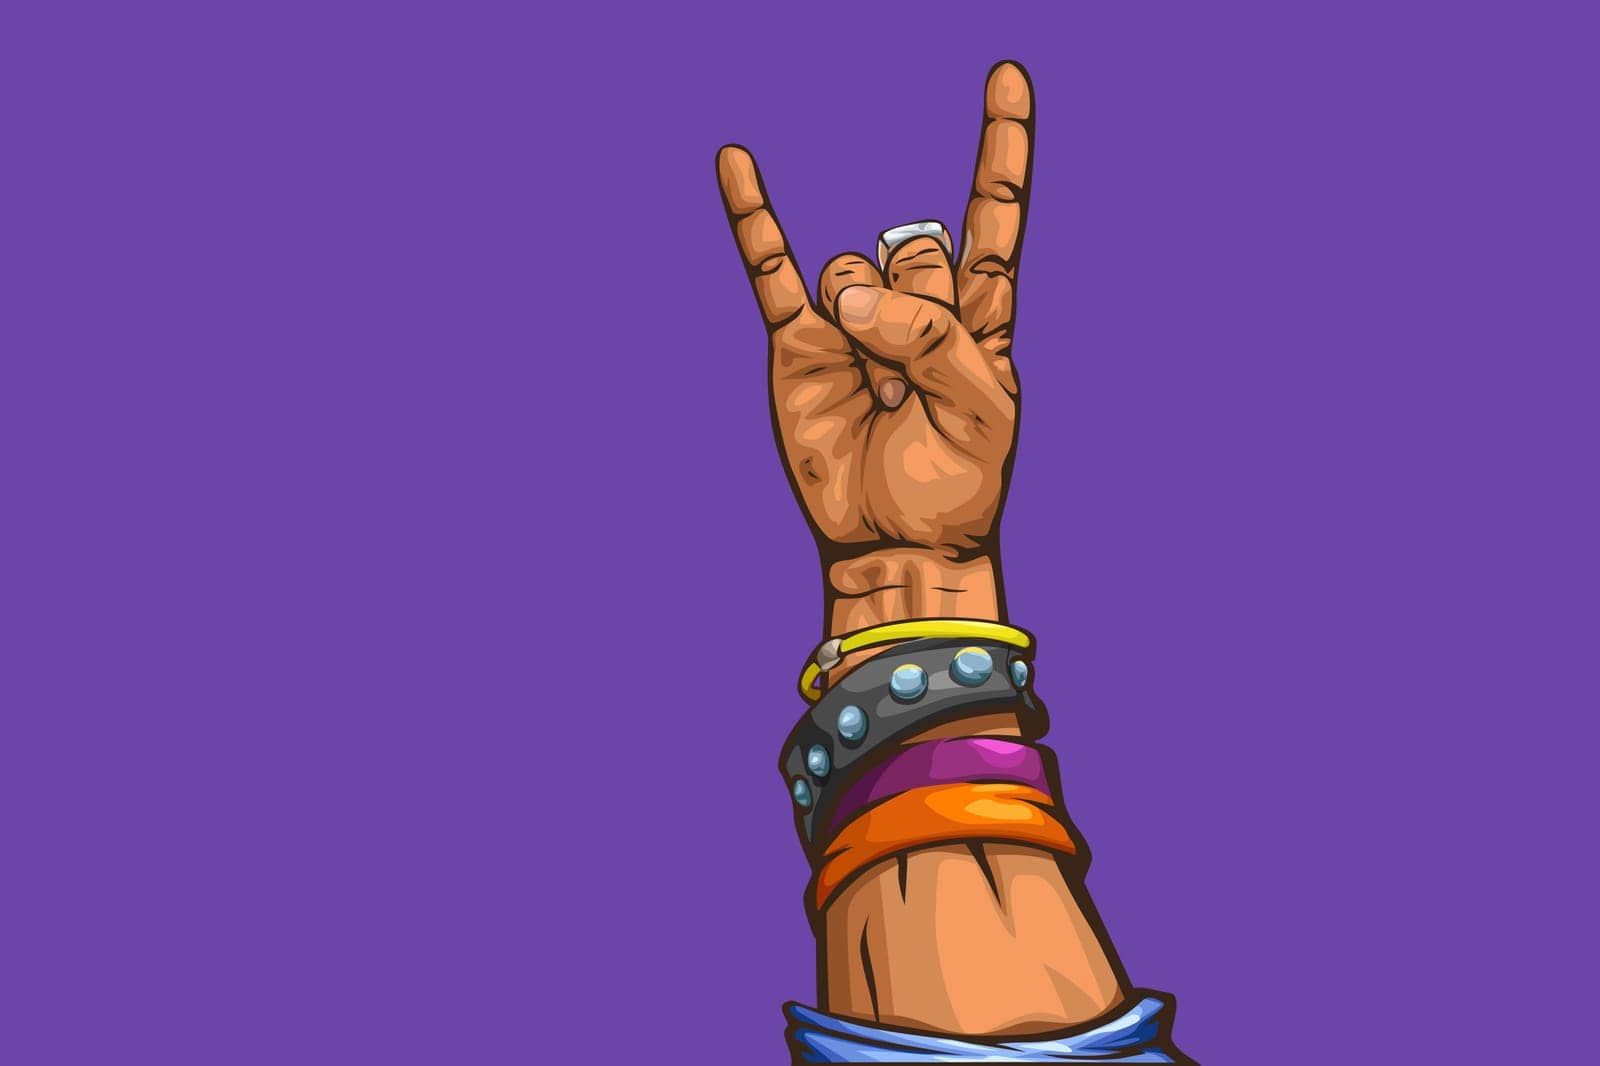 illustration of man hard rock hand with band cartoon style stroked on violet